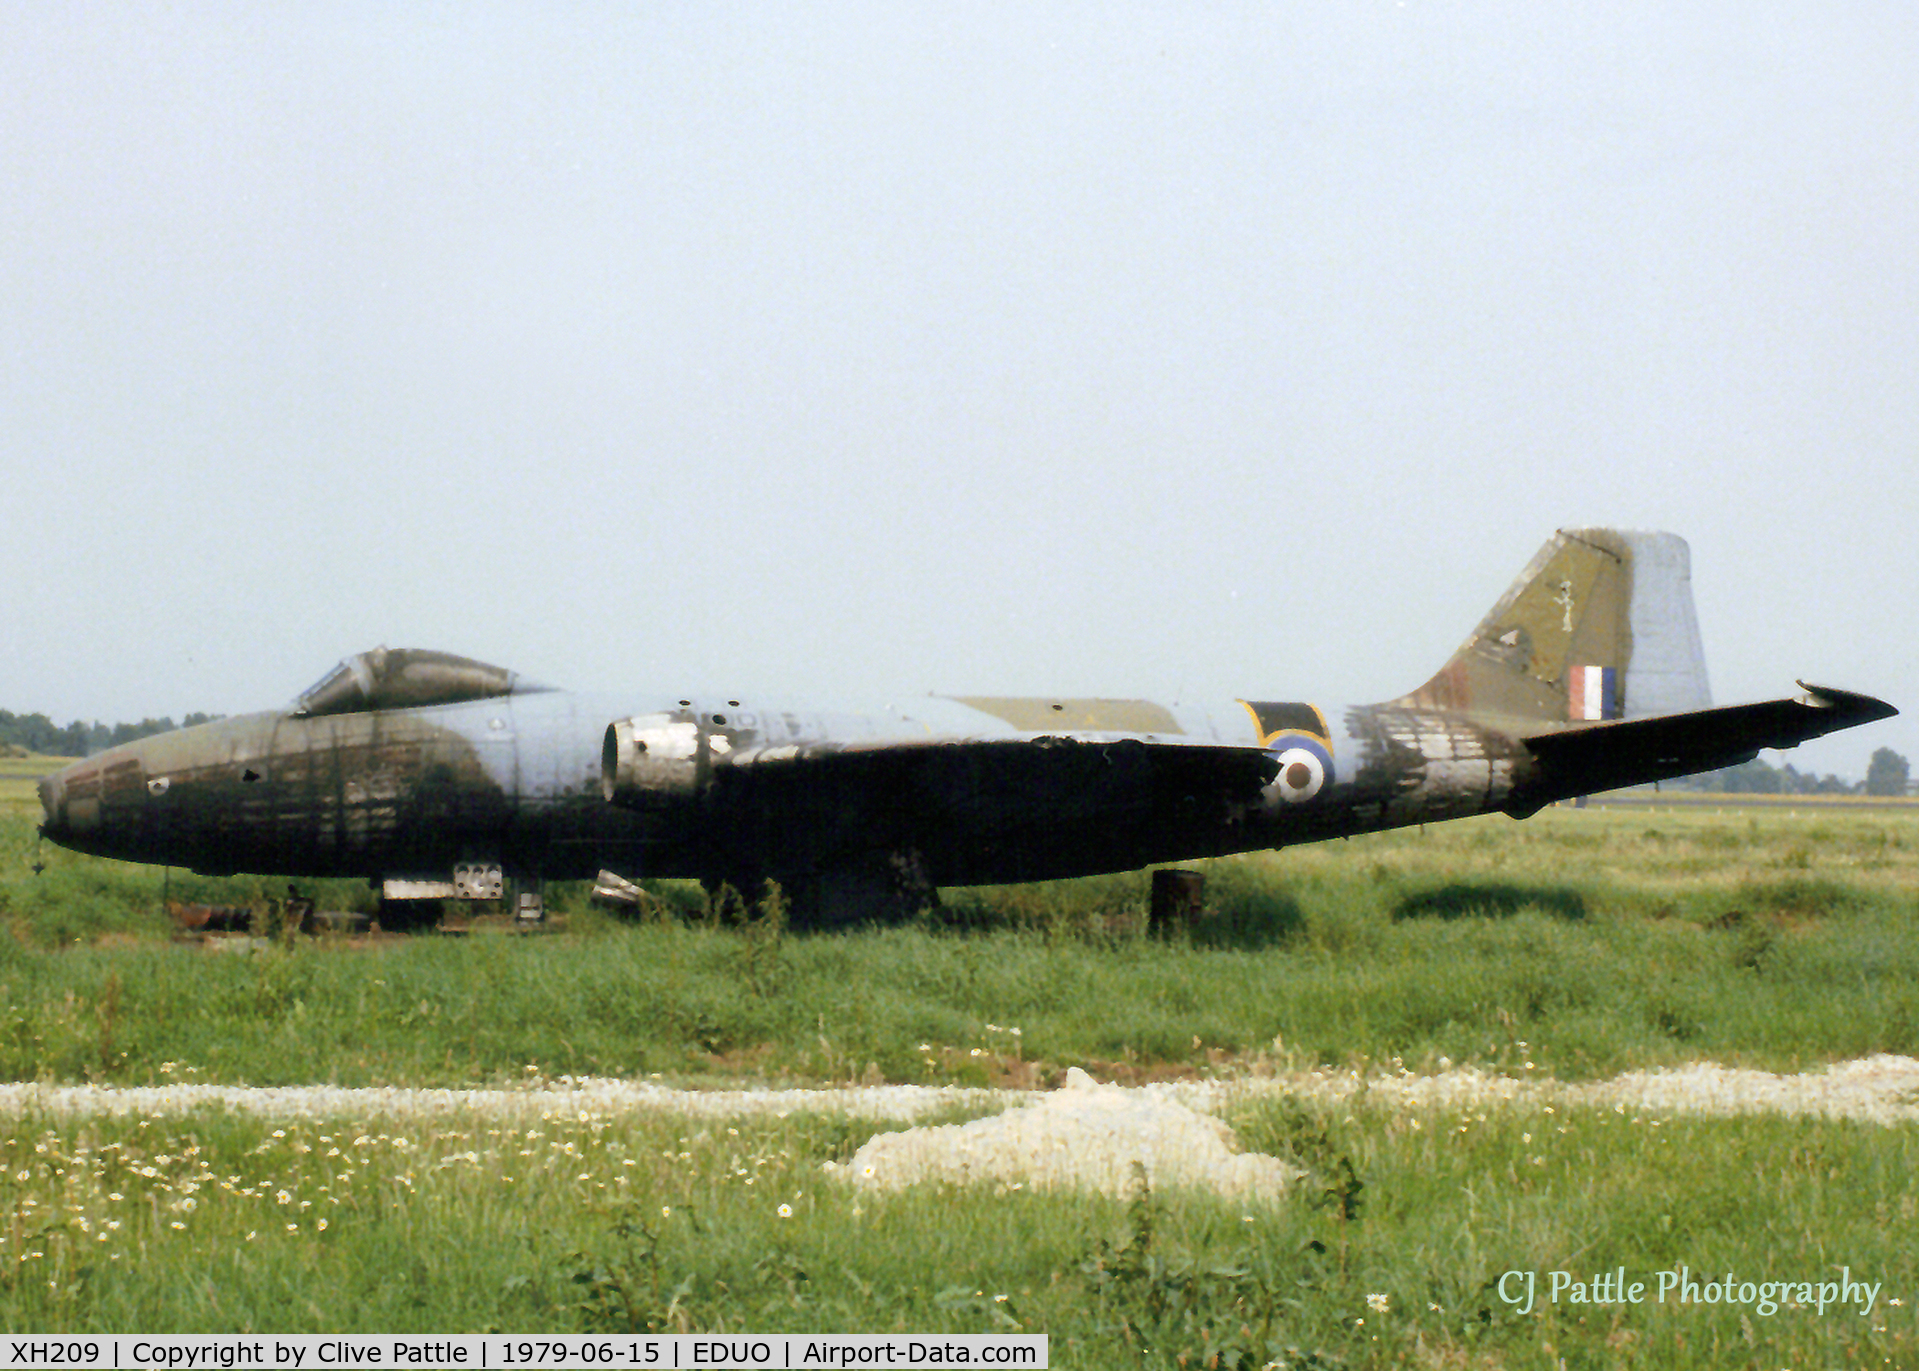 XH209, 1956 English Electric Canberra B(1).8 C/N Not found XH209, Scanned from print. Partly singed EE Canberra XH209 on the dump at RAF Gutersloh in June '79, its services no longer required as a decoy at the airfield. An ex 16 Sqn RAF machine - you can see the 'Saint' image on the tail.